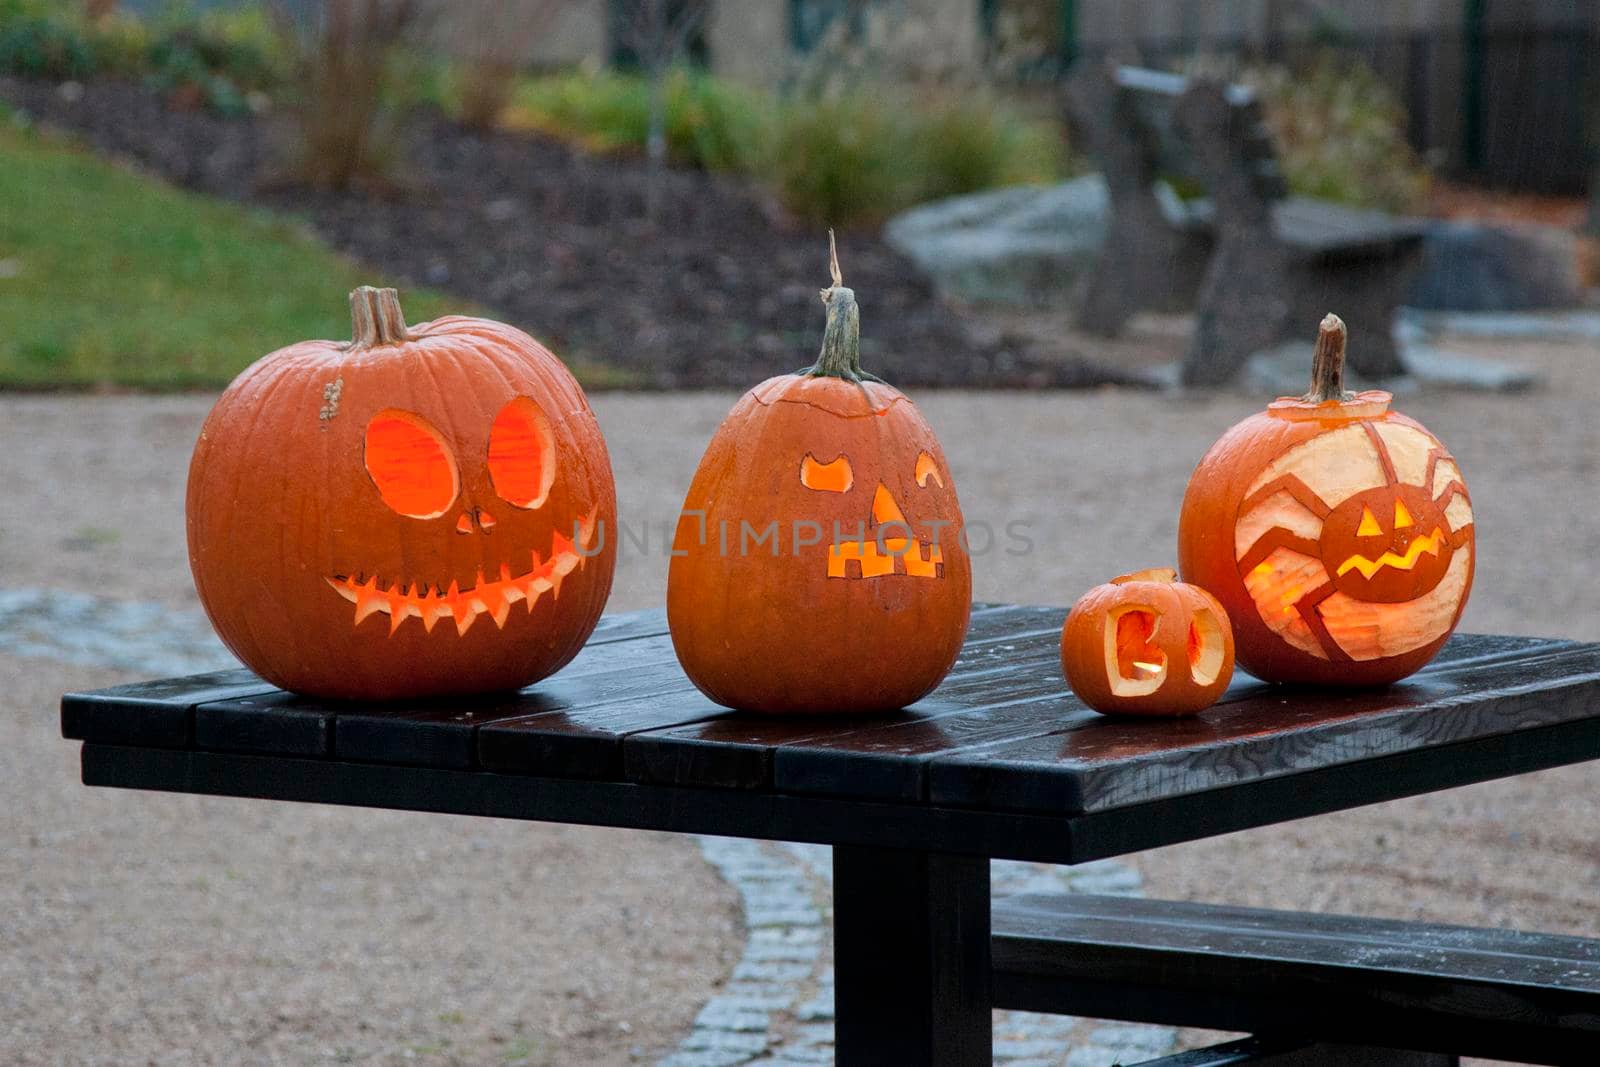 Four jack-o-lanterns or carved pumpkins with scary faces sit lit on a table. 